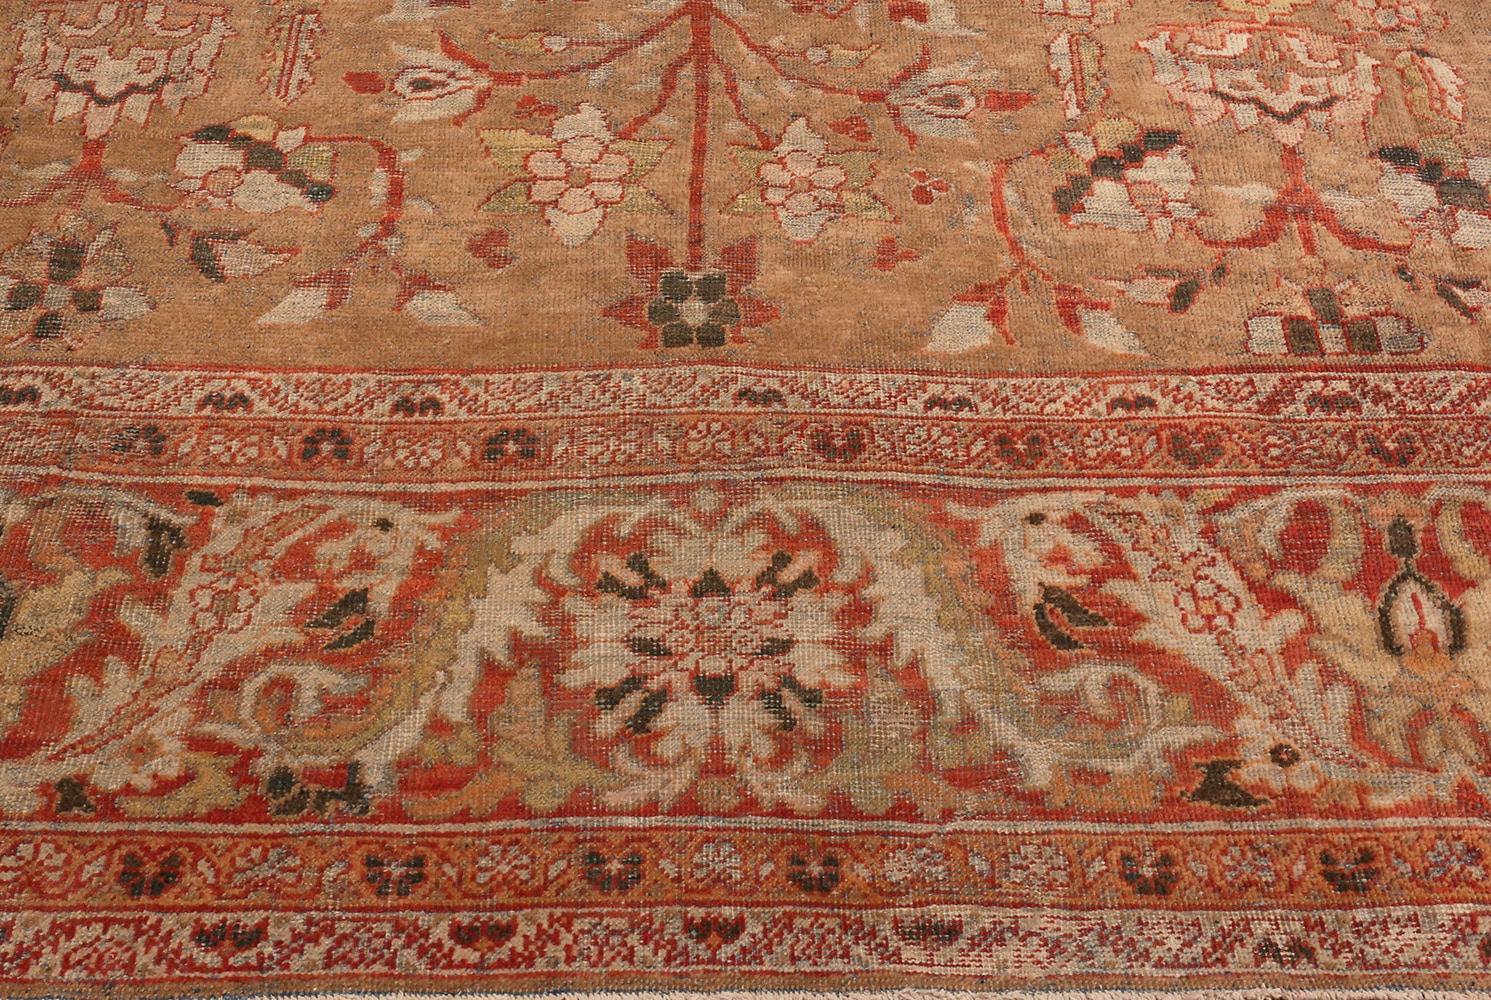 Beautiful large oversized antique Persian Sultanabad rug, country of origin / Rug type: Persian rugs, circa date 1900. Size: 15 ft x 24 ft 6 in (4.57 m x 7.47 m). 

